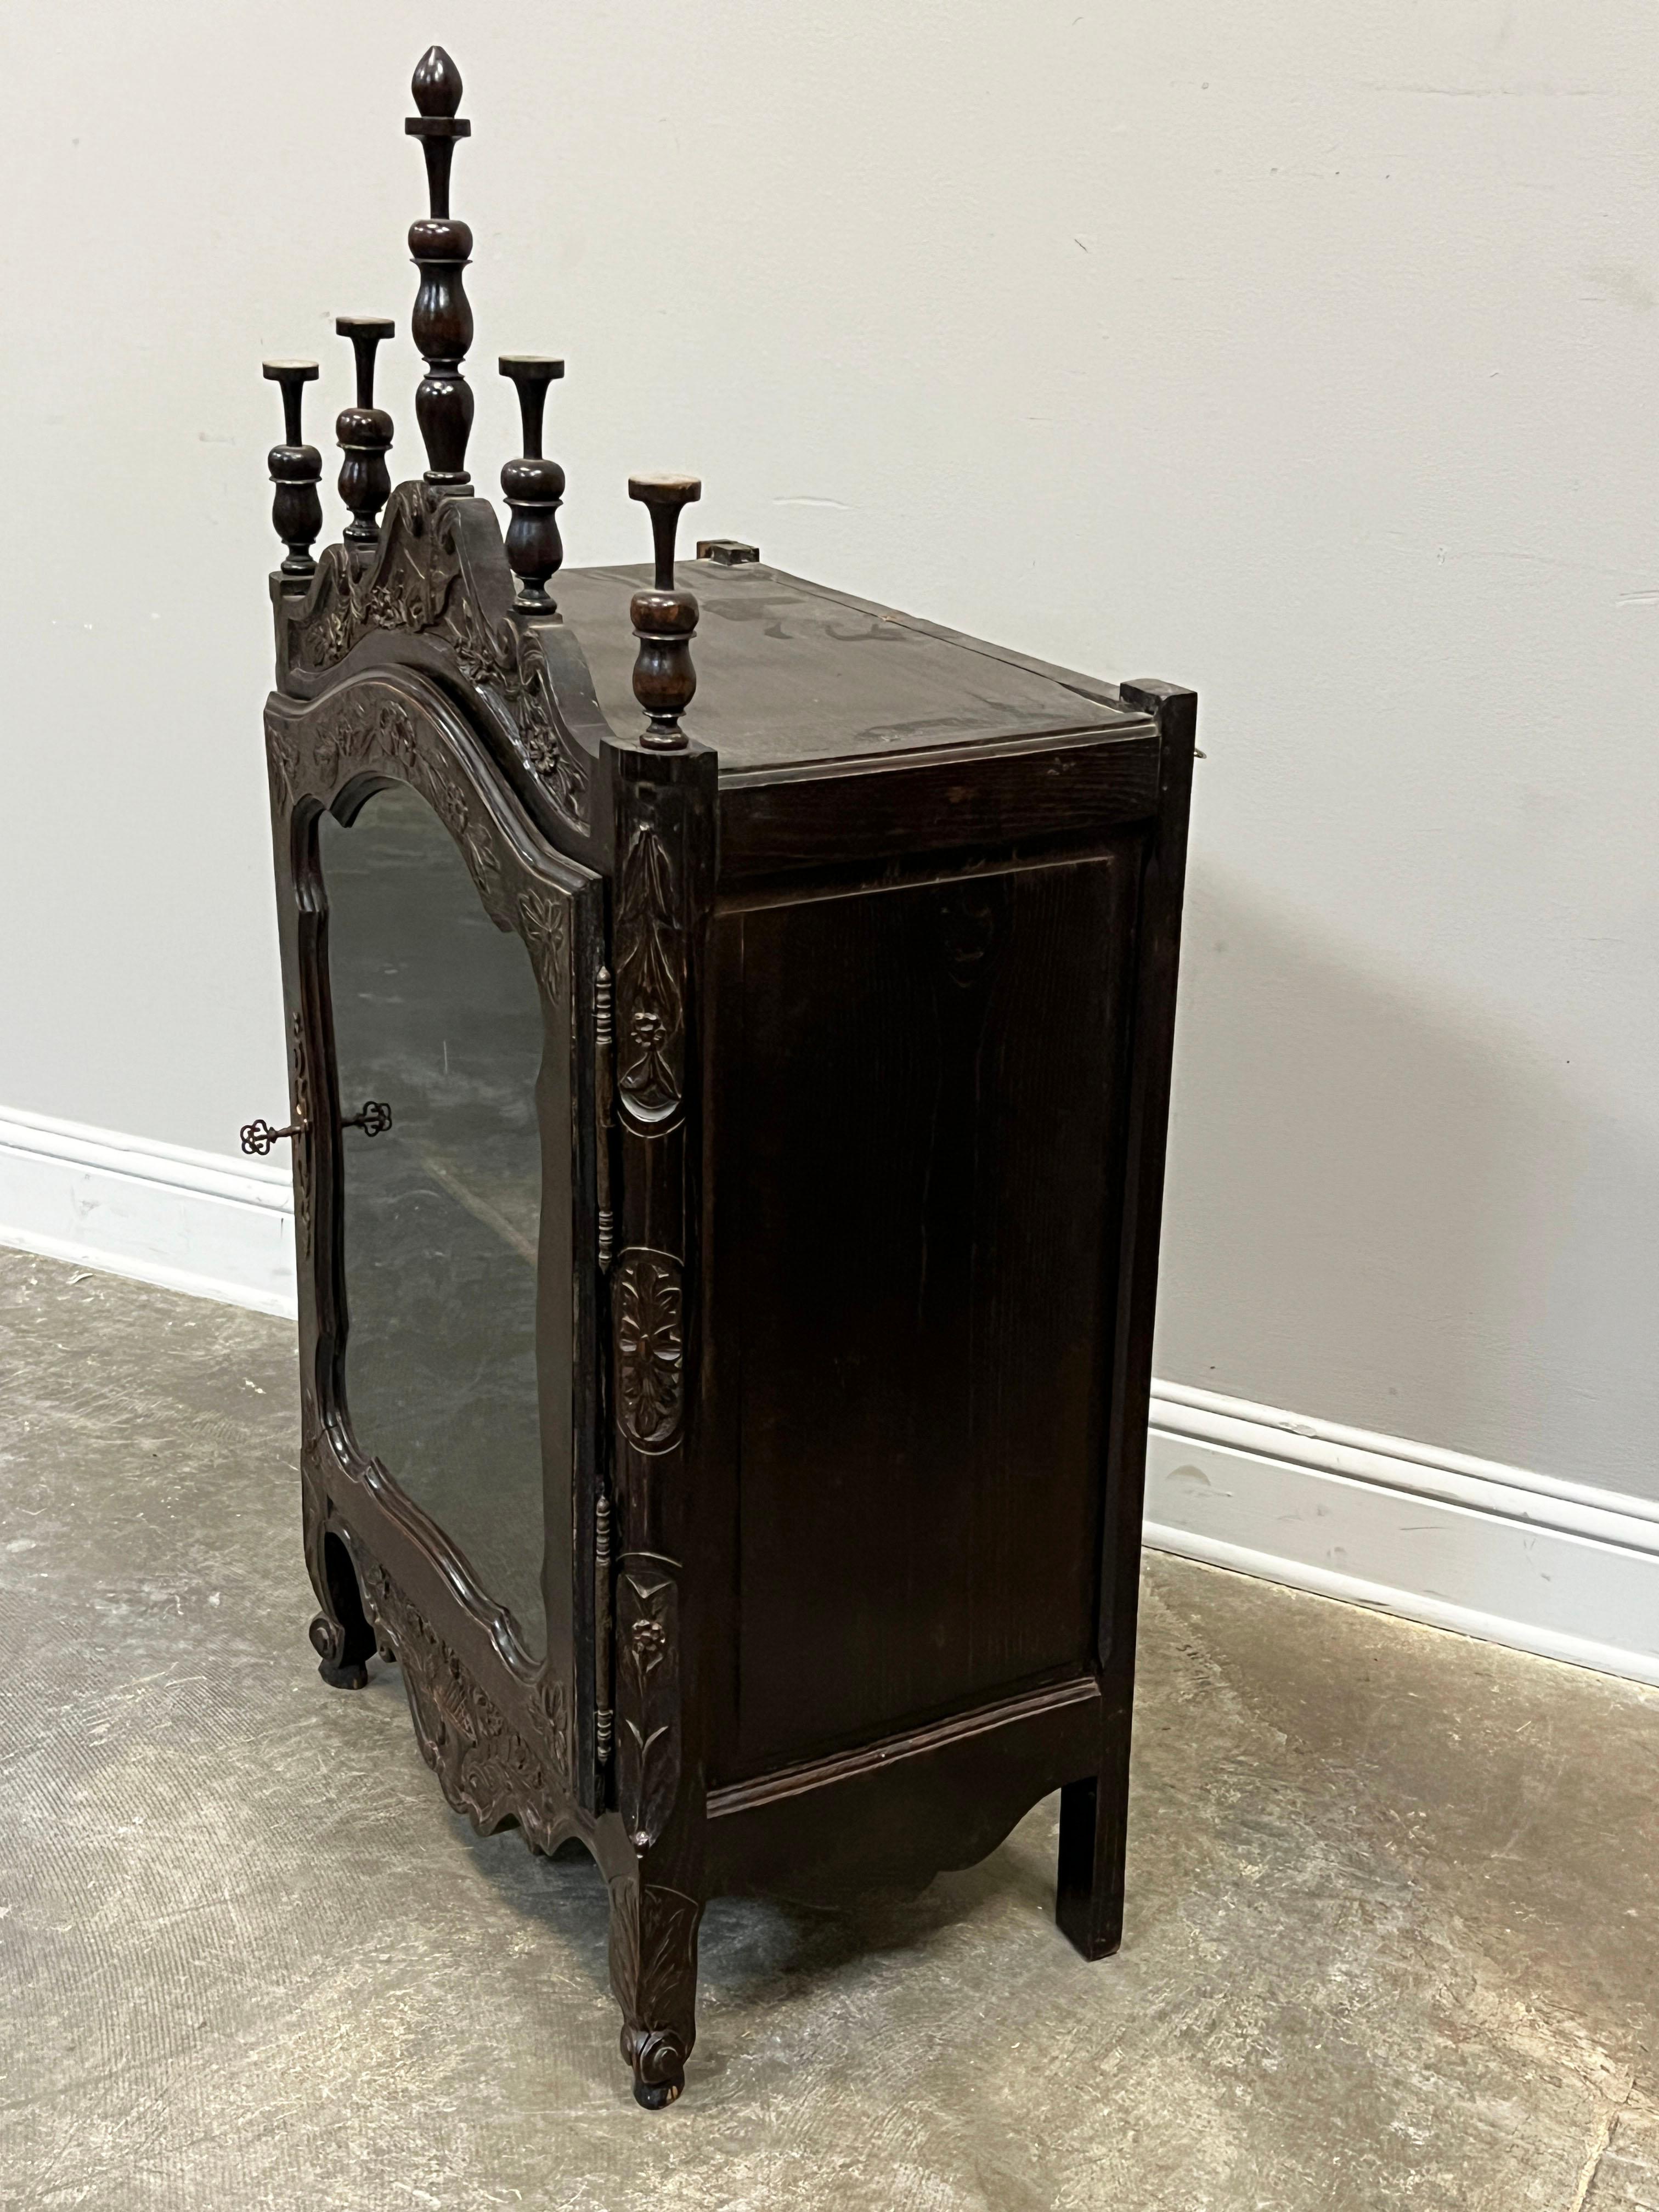 19th C. French Louis XV style hand carved vitrine in oak with original glass. Hand carved decorations indicative of the Louis XV style along with the cabriole legs. Five removable finials and one adjustable shelf. Vitrine can stand on its four legs